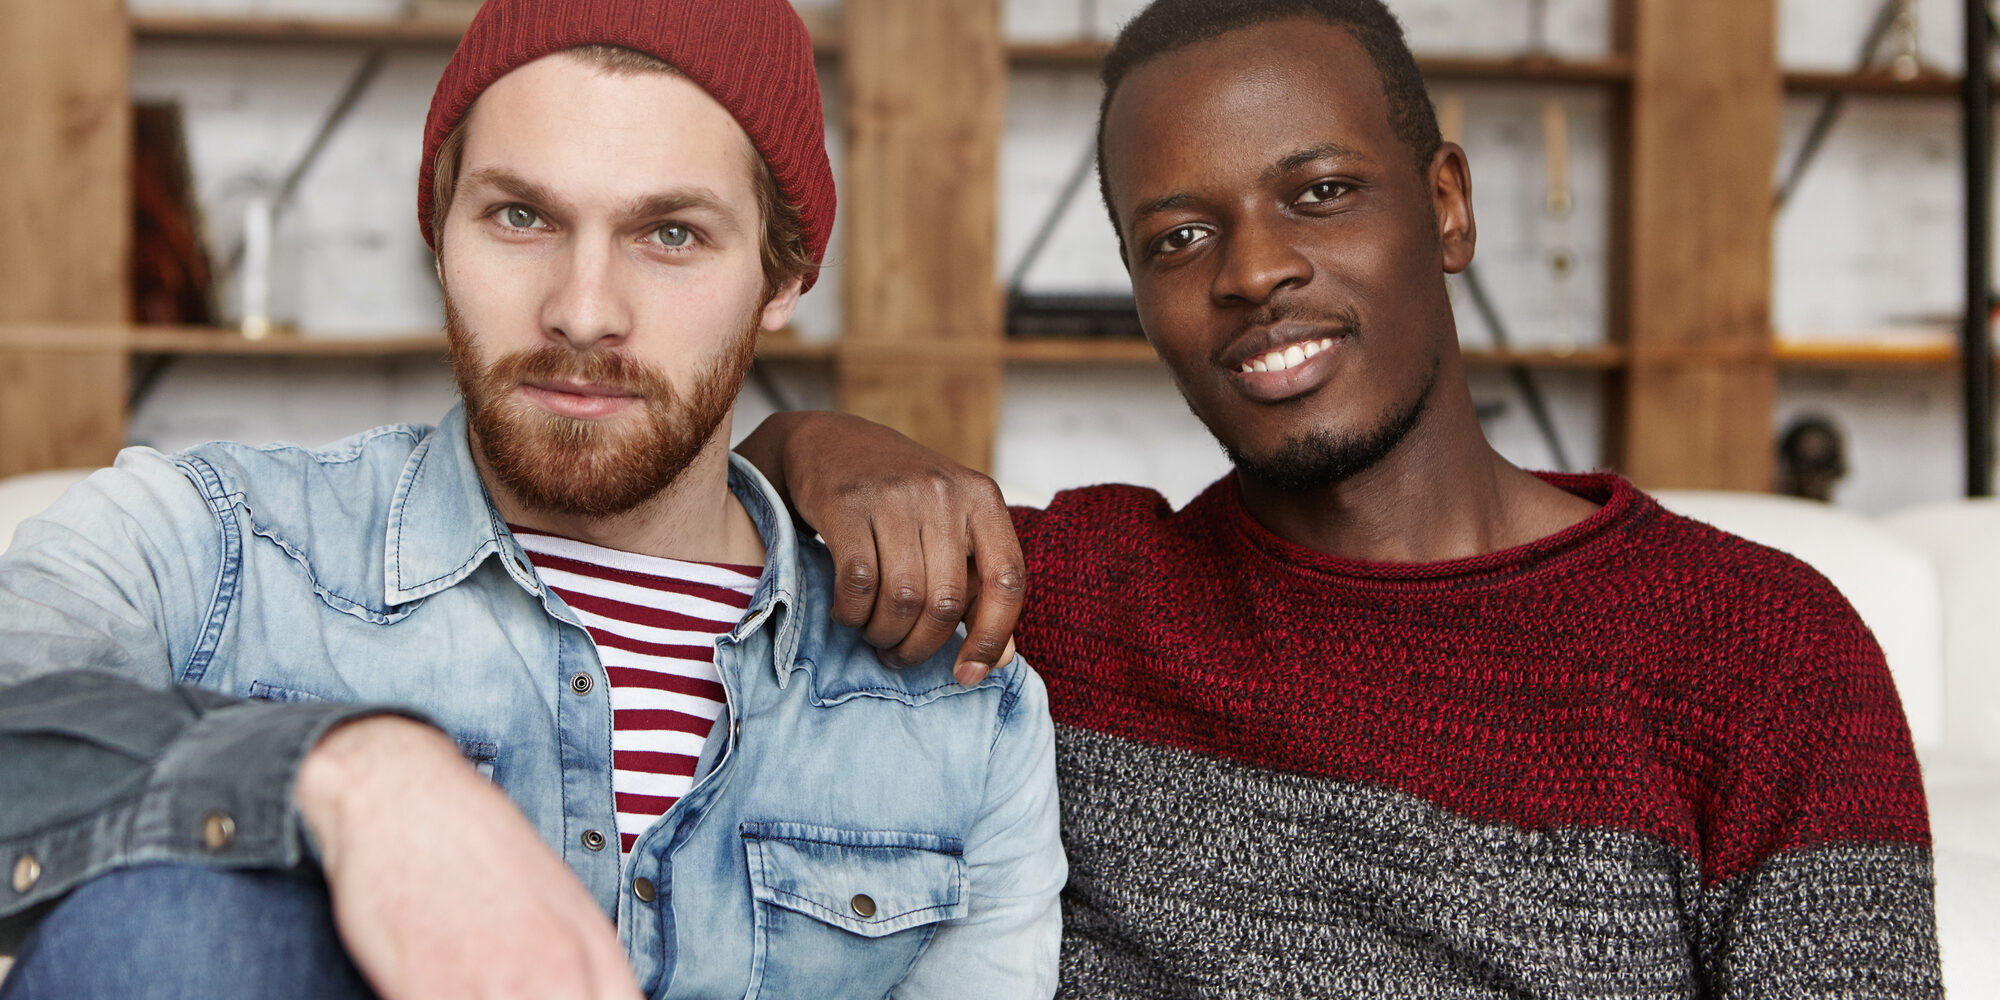 Homosexual love and relationships concept. Interracial gay couple relaxing at cafe: African-American man in sweater holding hand on his stylish bearded Caucasian boyfriend's shoulder in trendy hat